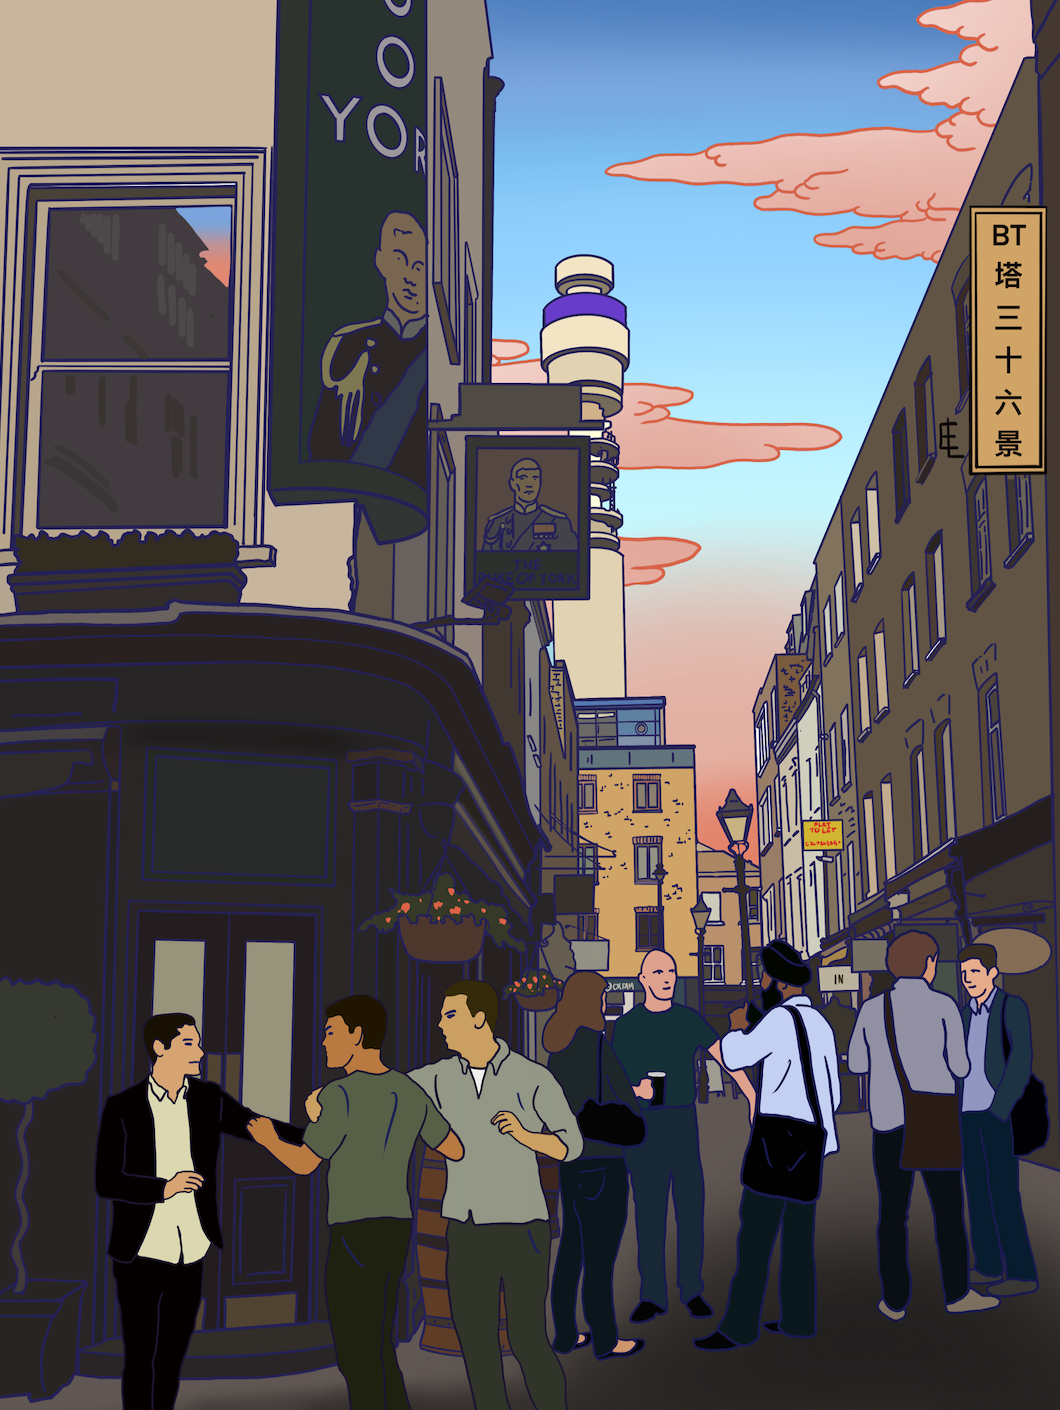 ‘Summer Evening At The Pub’: BT Tower By Rathbone Street